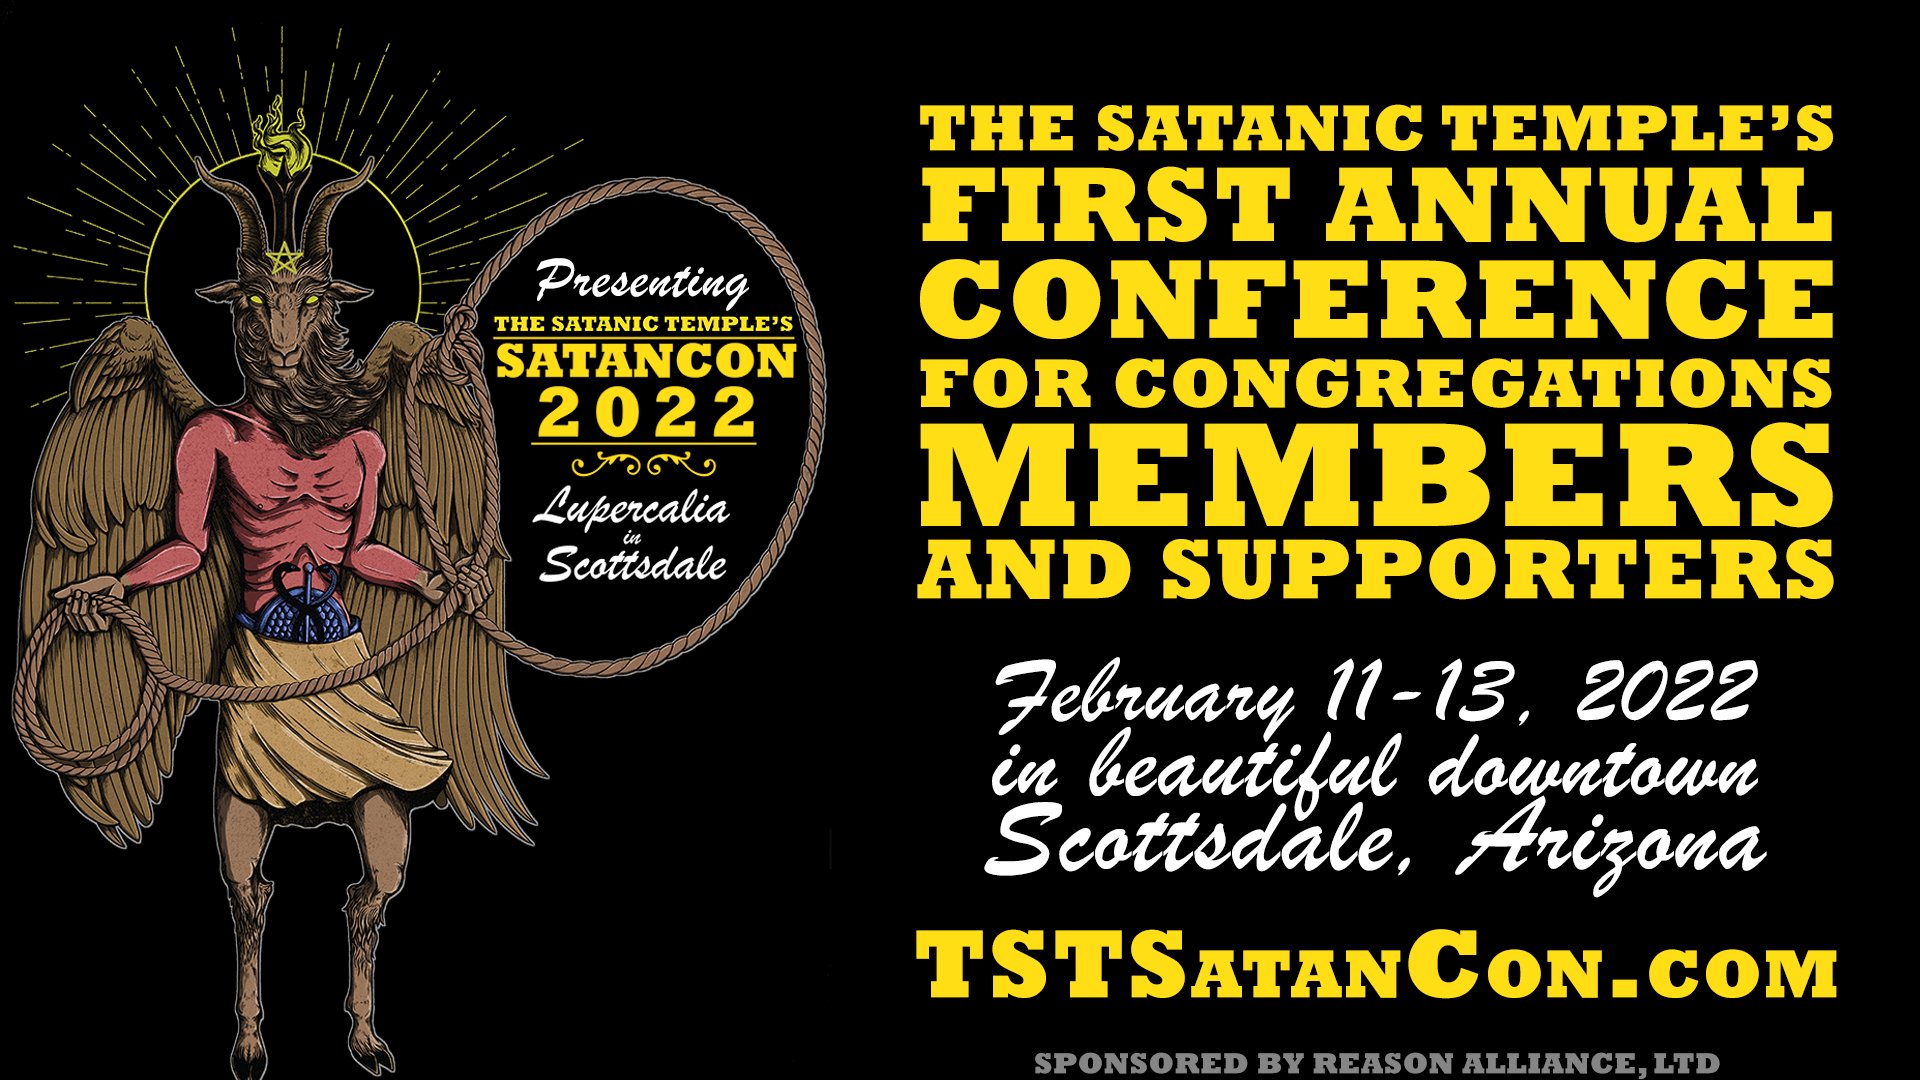 The Satanic Temple's first annual conference February 11-13, 2022, sponsored by Reason Alliance, Ltd